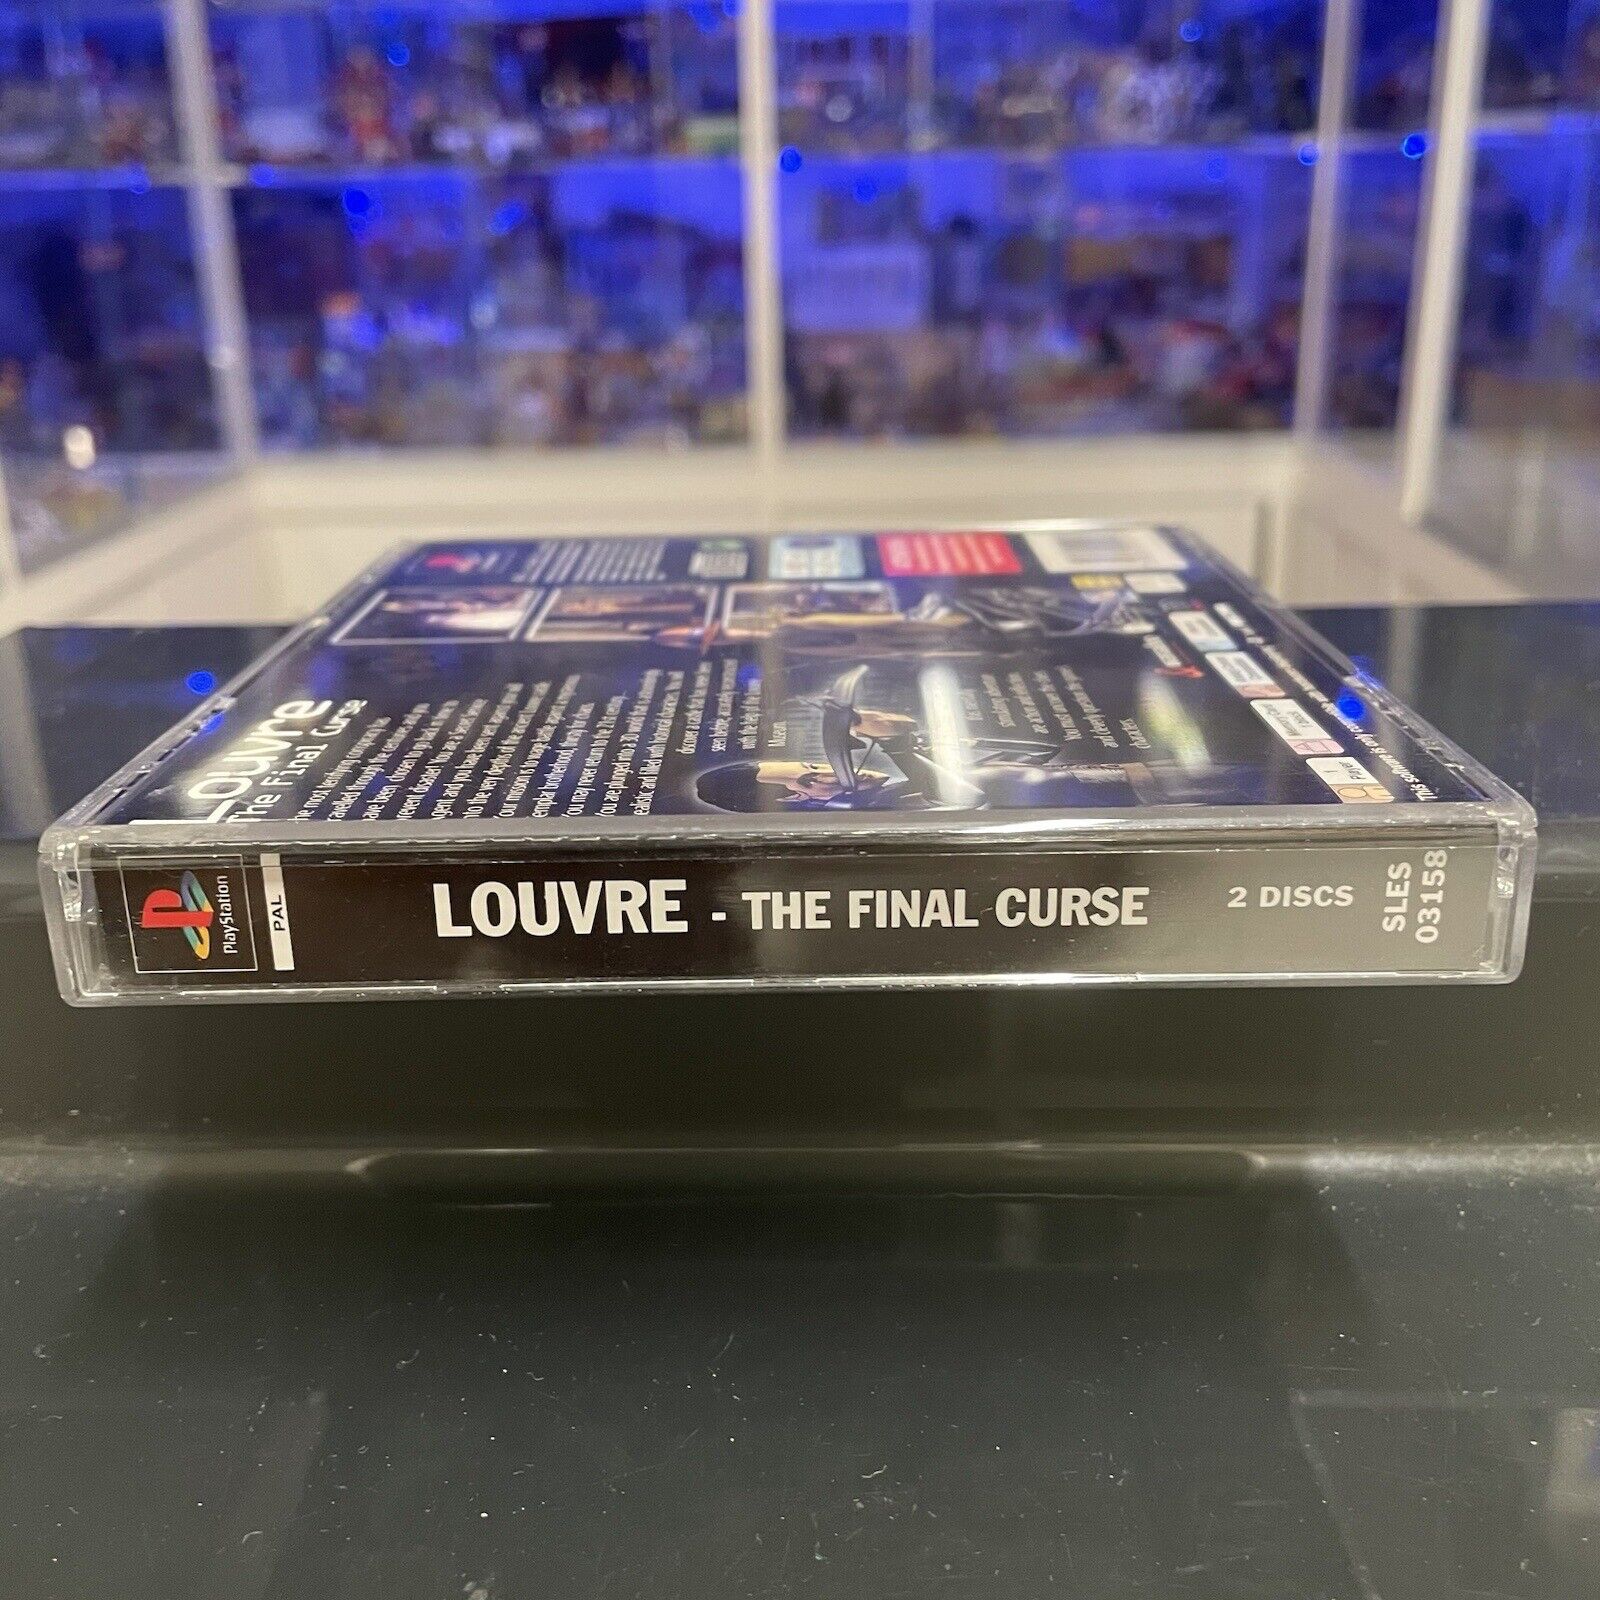 Ps1-Louvre-the-final-curse-Sony-Playstation-Pal-145340928880-4